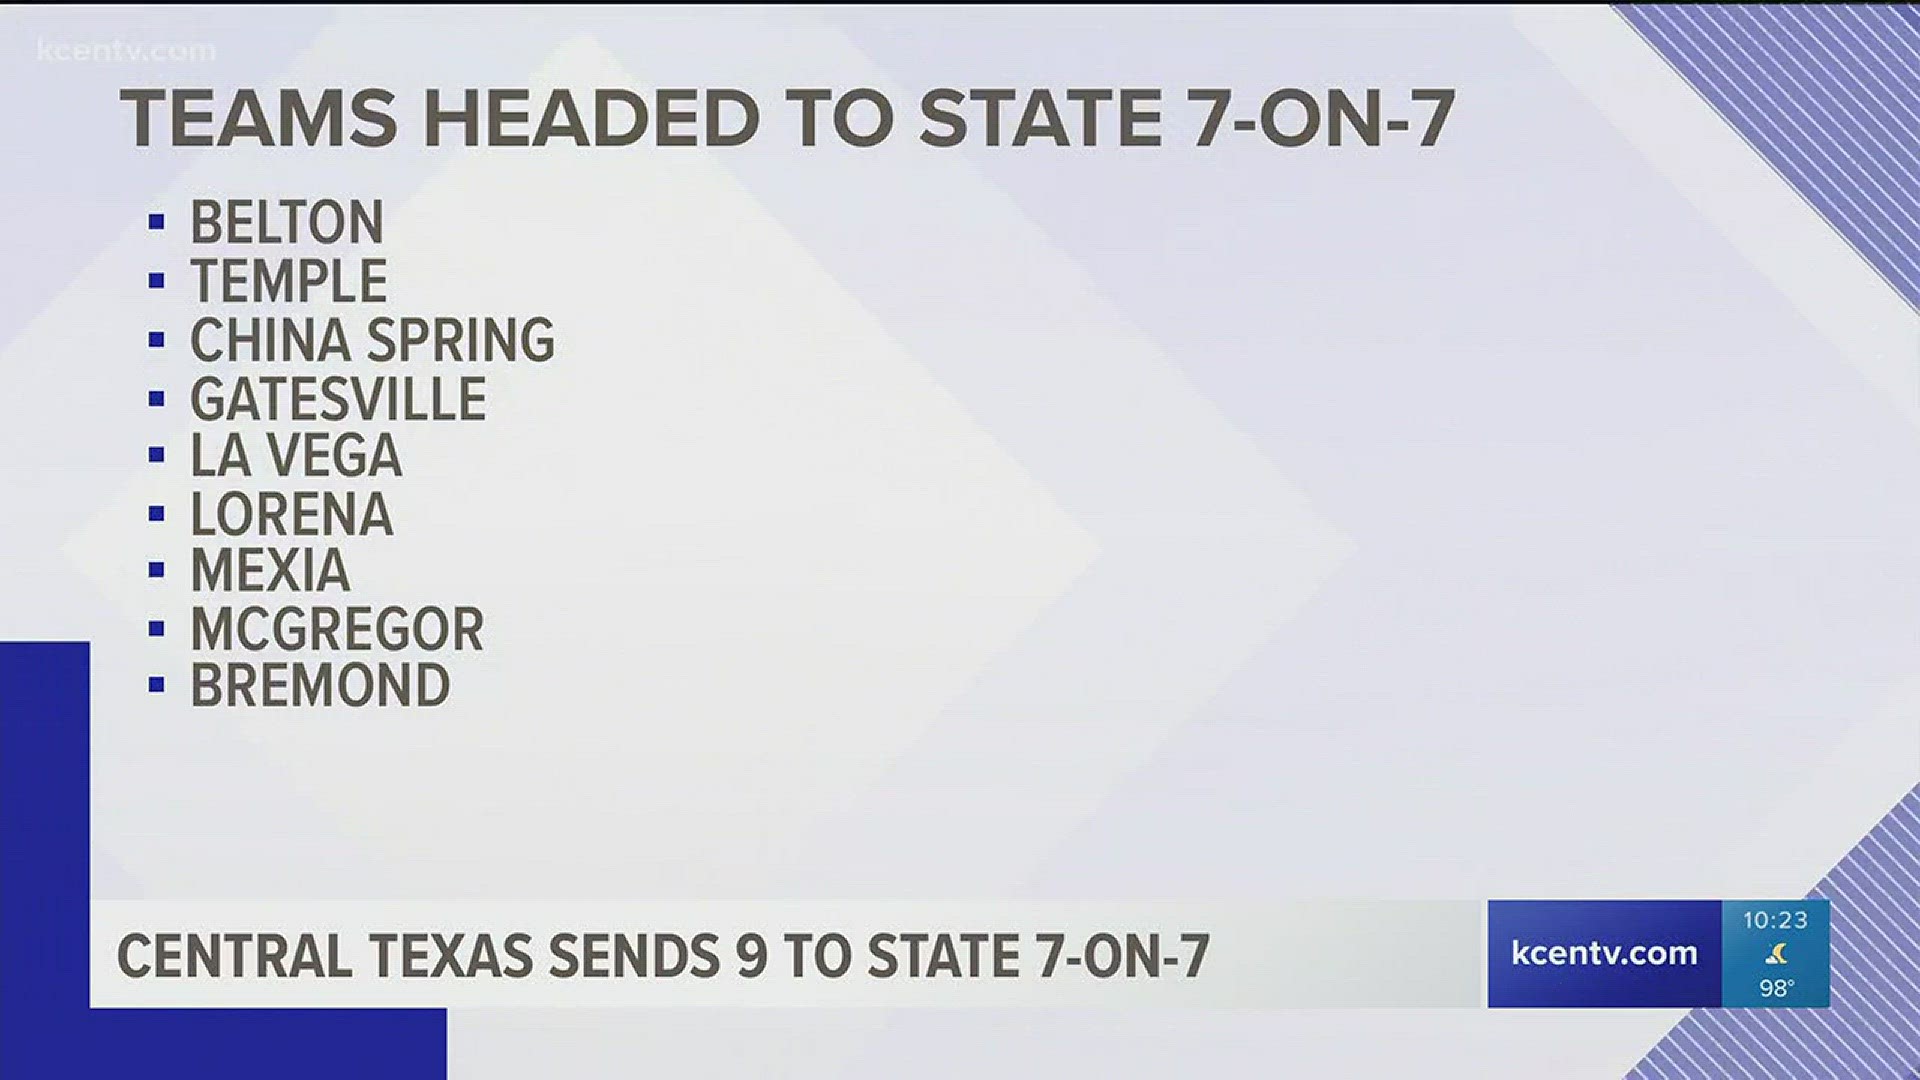 Two teams in Div. 1, 6 in Div. 2 and one in Div. 3 will play in the state 7-on-7 tournament in College Station.